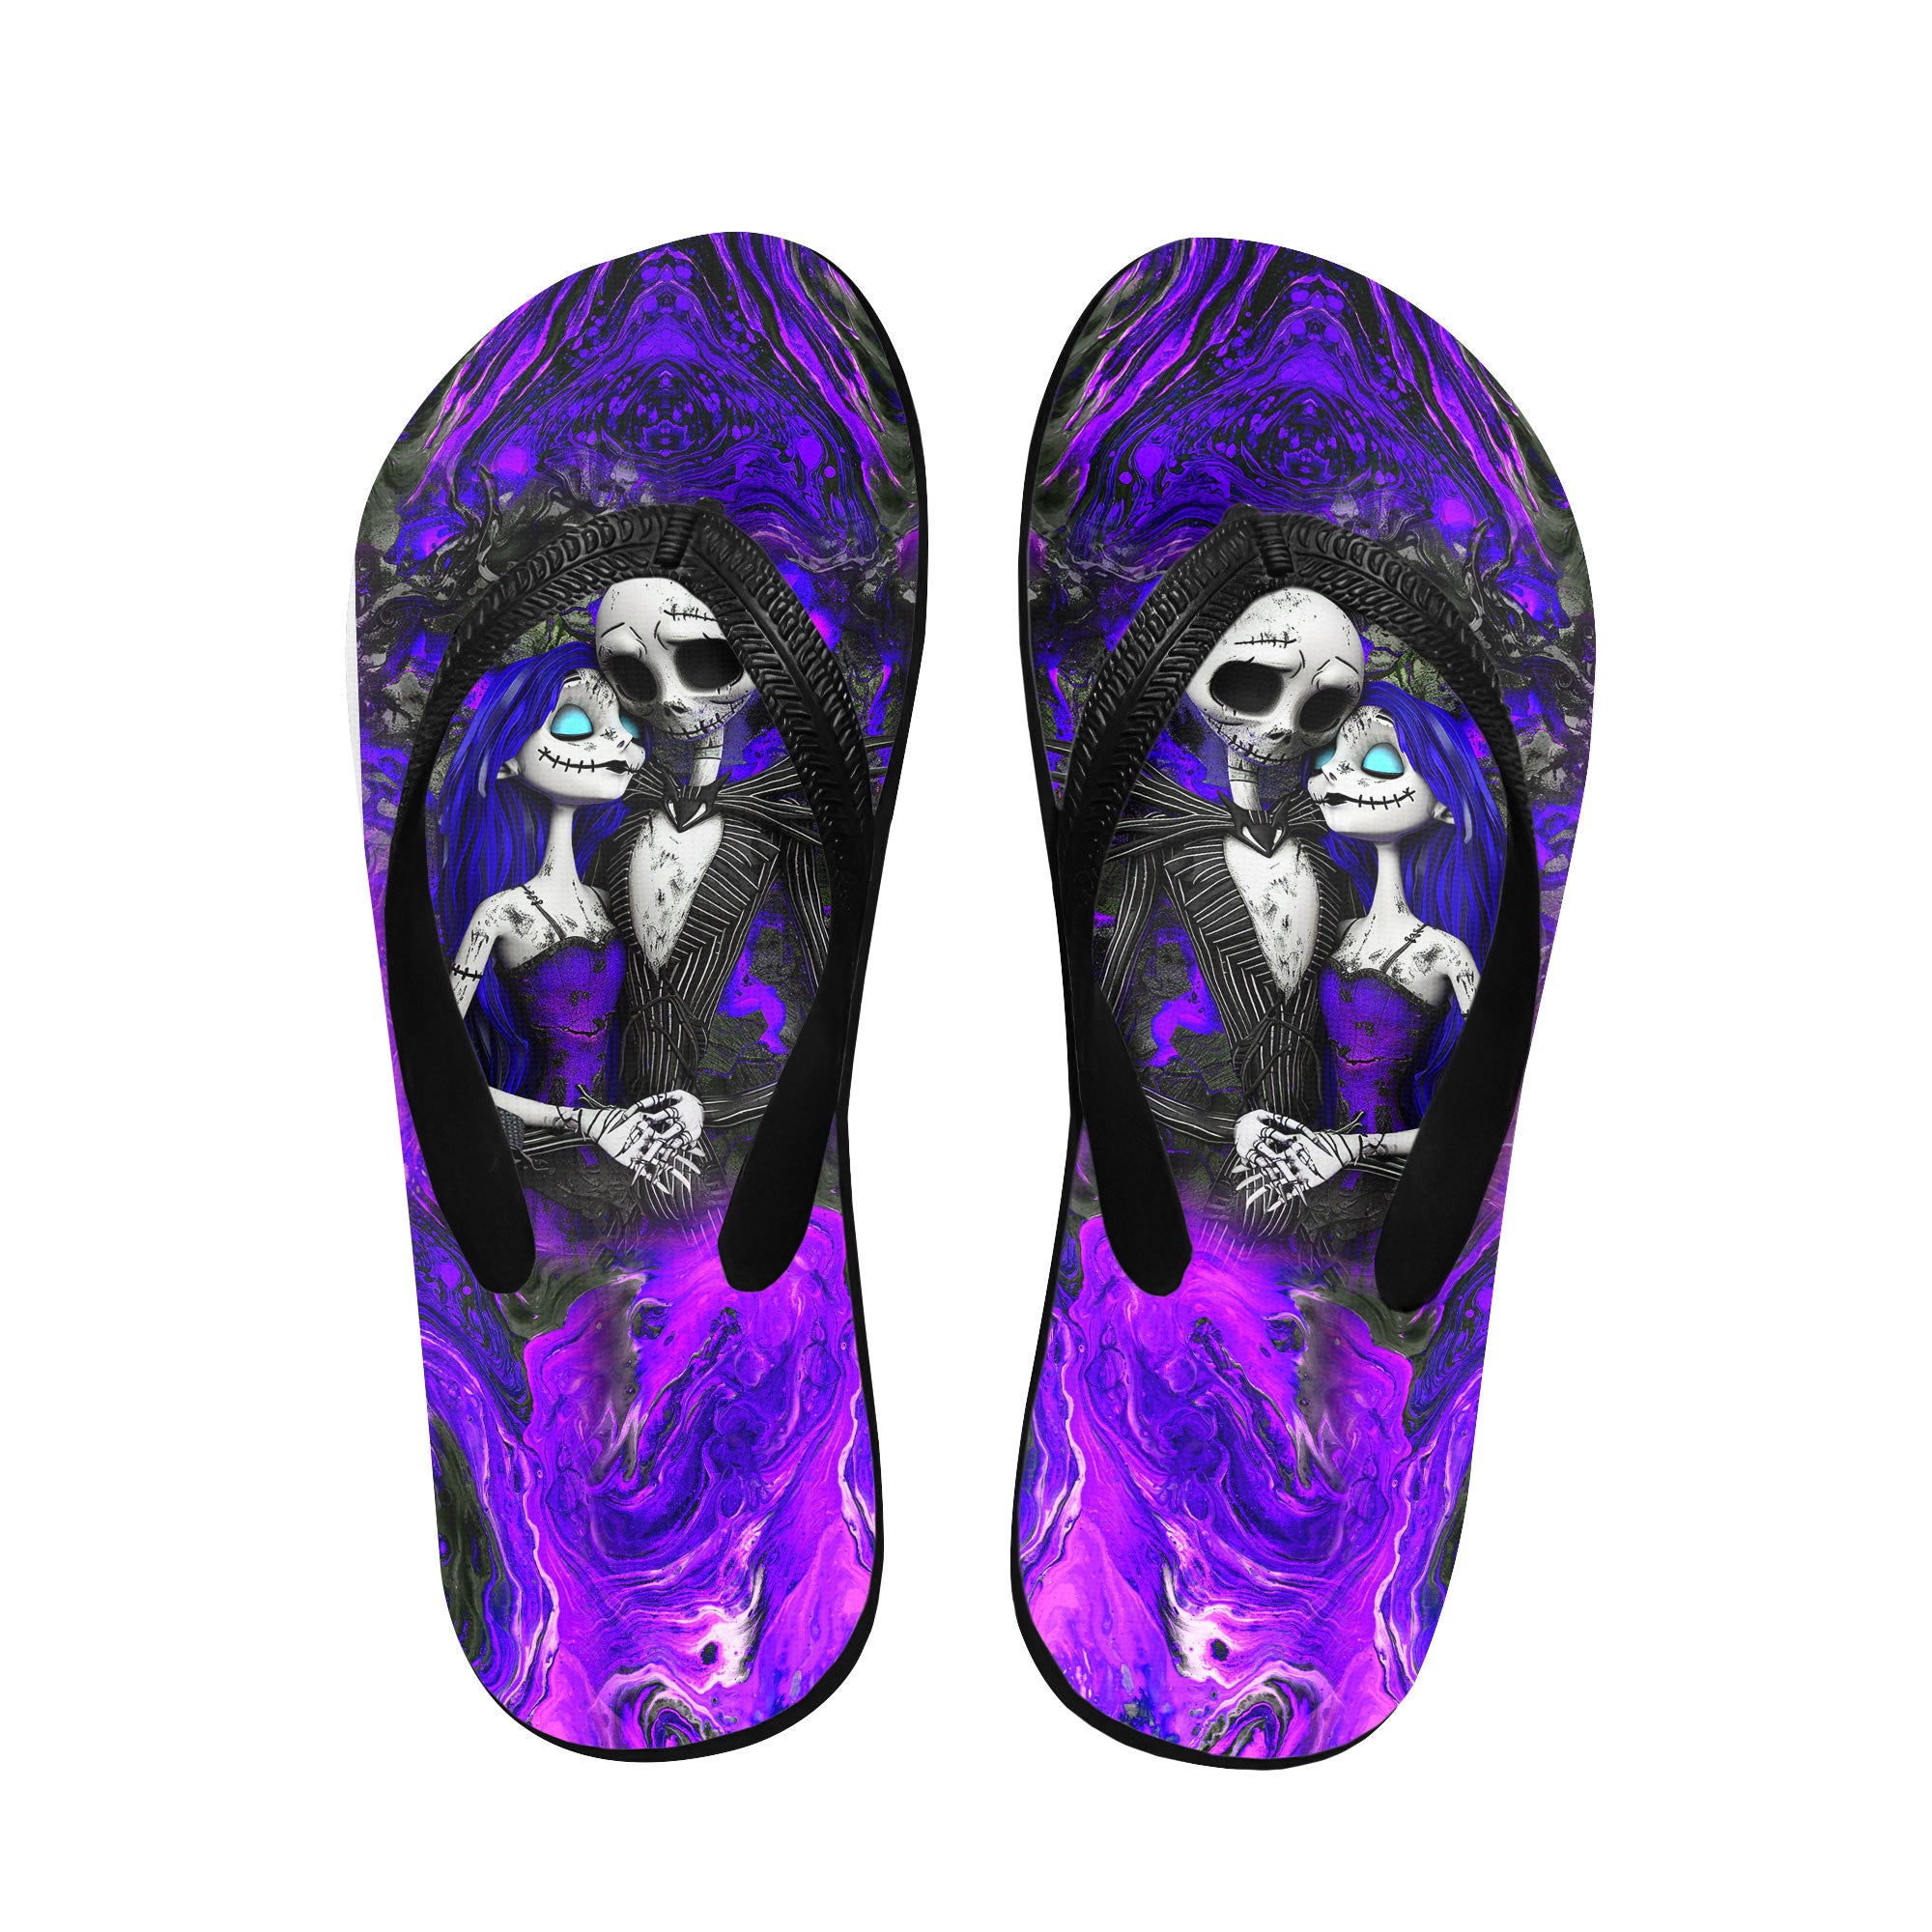 Image of a pair of beach flip flops with a sleek design, featuring a comfortable yoga mat footbed, non-slip sole, and water-friendly materials. Perfect for summer outings, beach walks, and casual occasions.